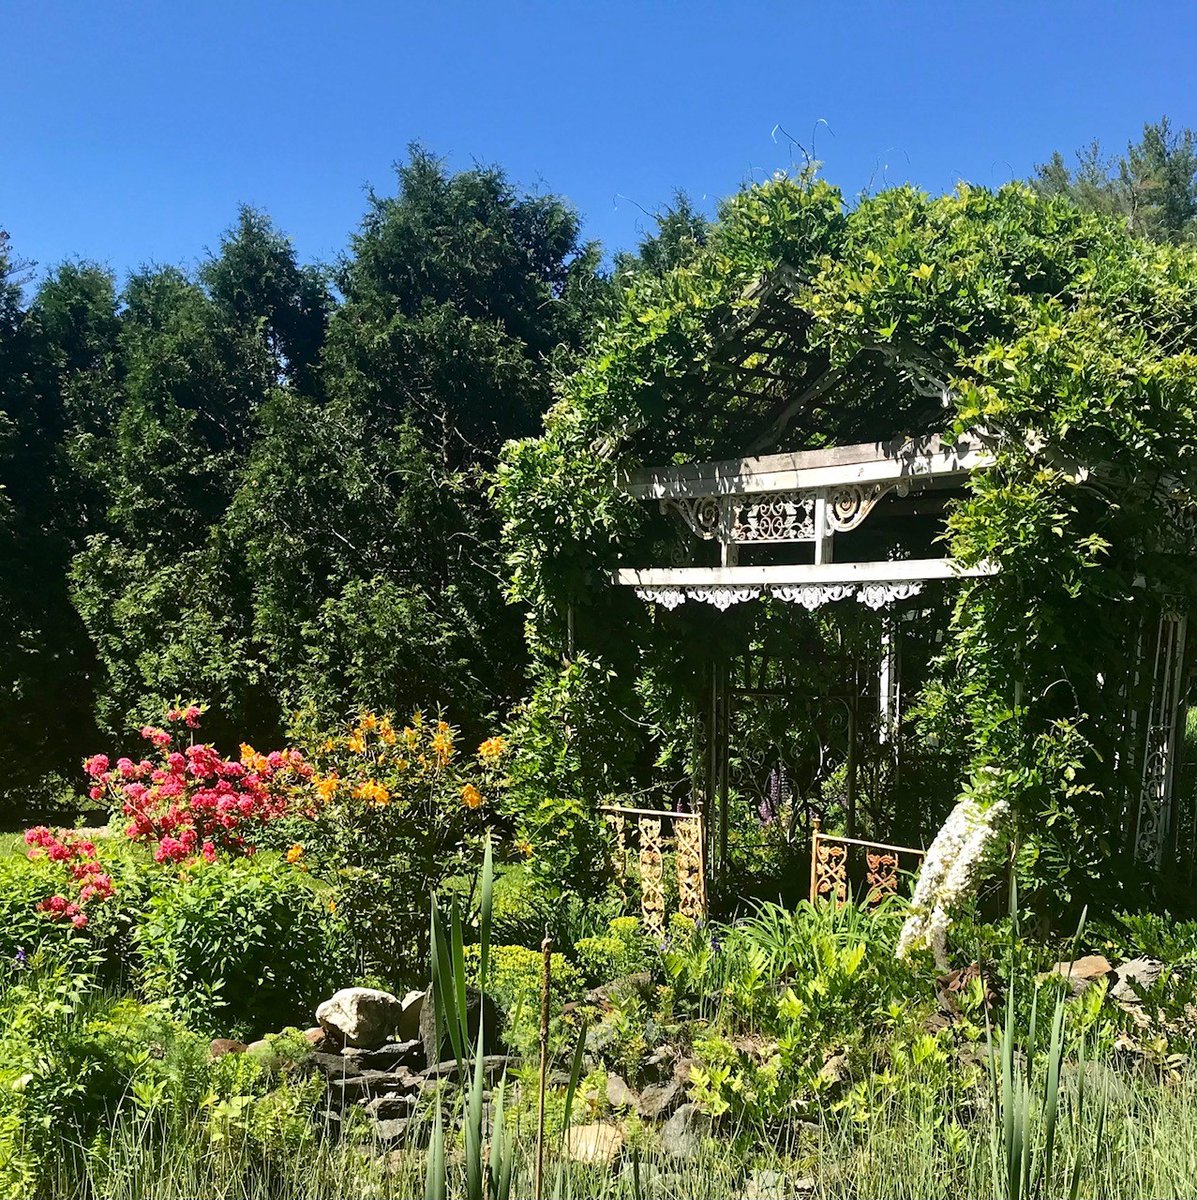 Luscious greens and the vibrant colors of summer abound in the Three Sisters Sanctuary gardens! We hope to see you soon!  #summerflowers #lushgardens #gardentours